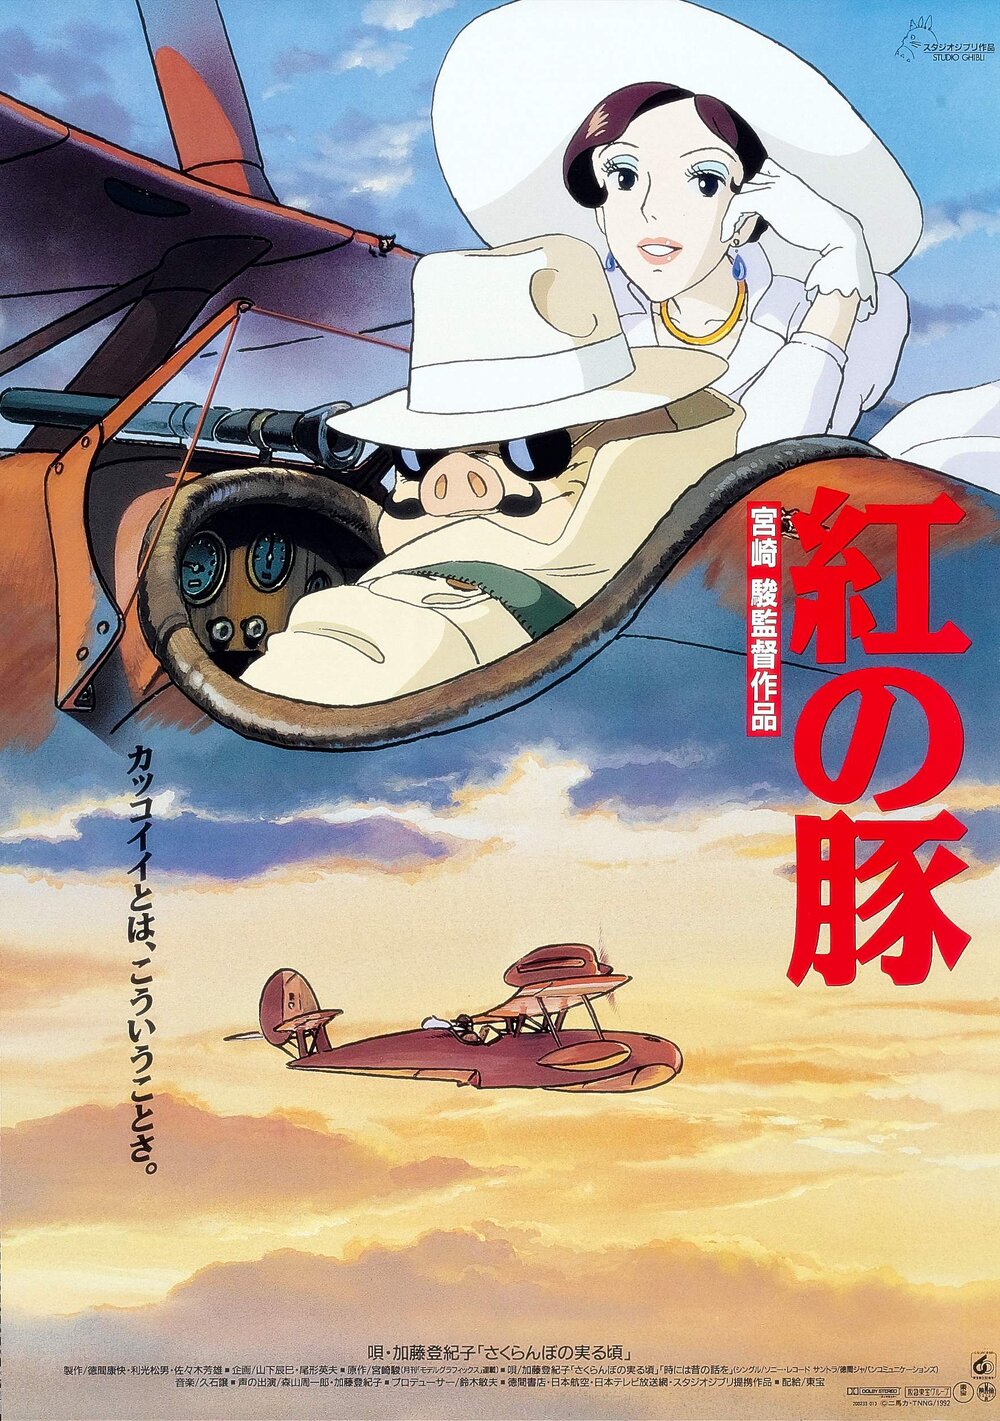   Porco Rosso  (1992), Japanese Movie Poster Source:  Anime-TLDR  